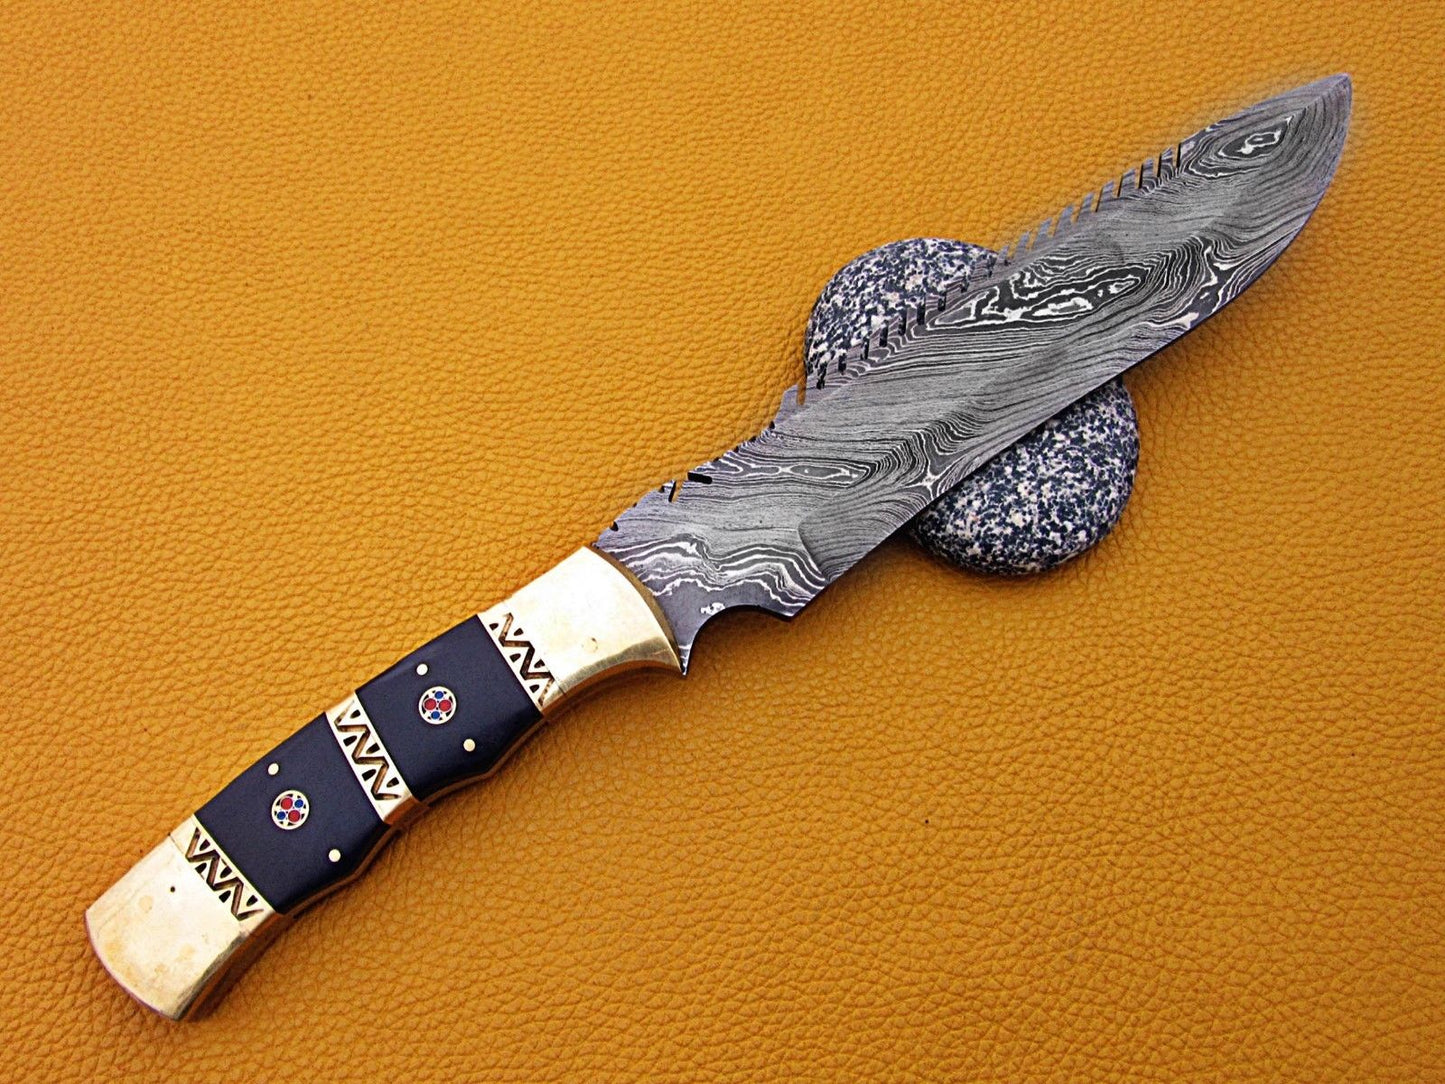 14″ long Damascus steel full tang blade hunting knife, Bull horn scale with engraved Brass spacer & bolster, Co hide Leather sheath